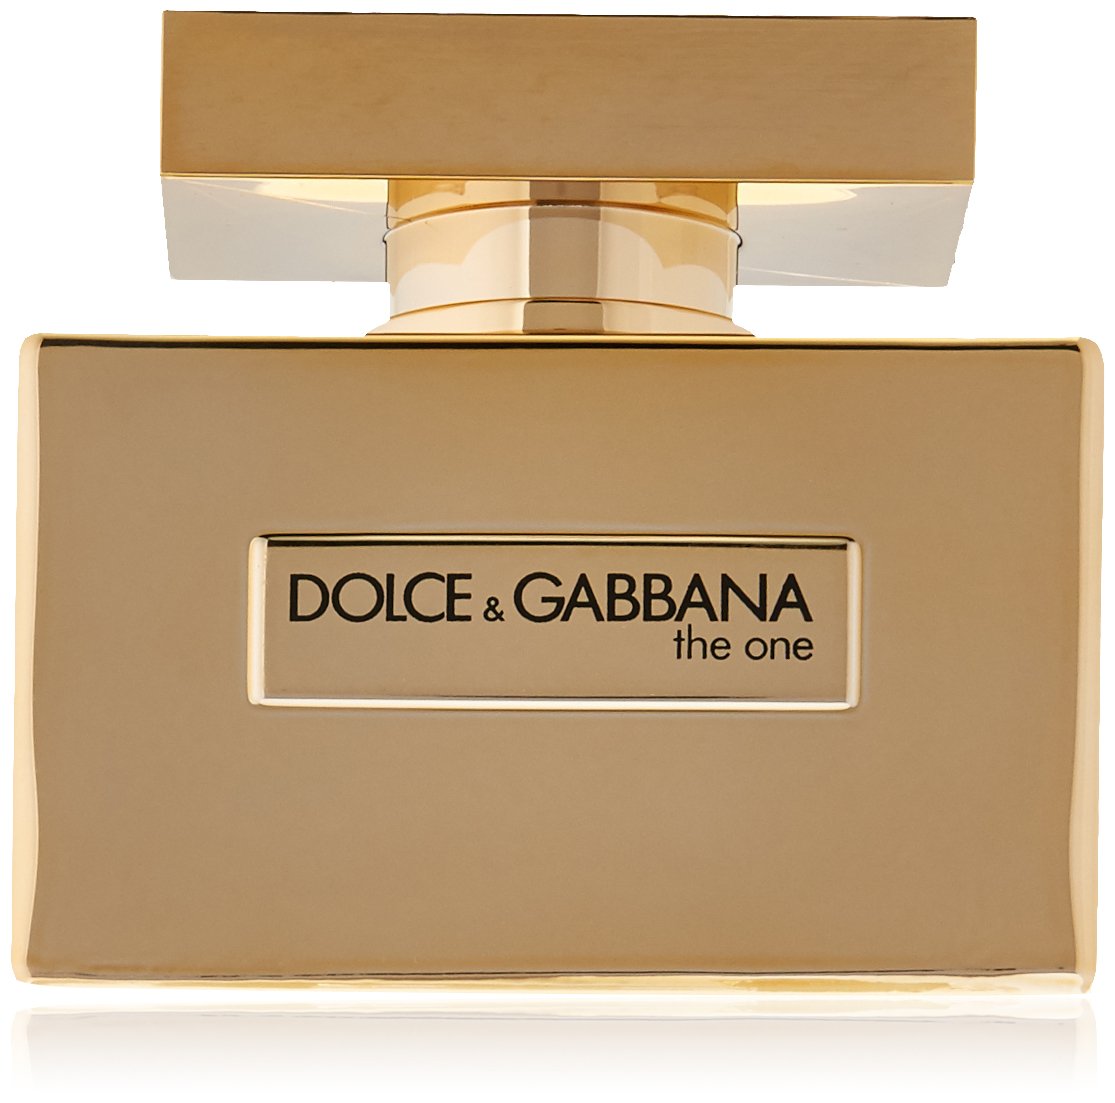 Dolce and Gabbana (D & G) The One Gold Edp For Women 75Ml – The